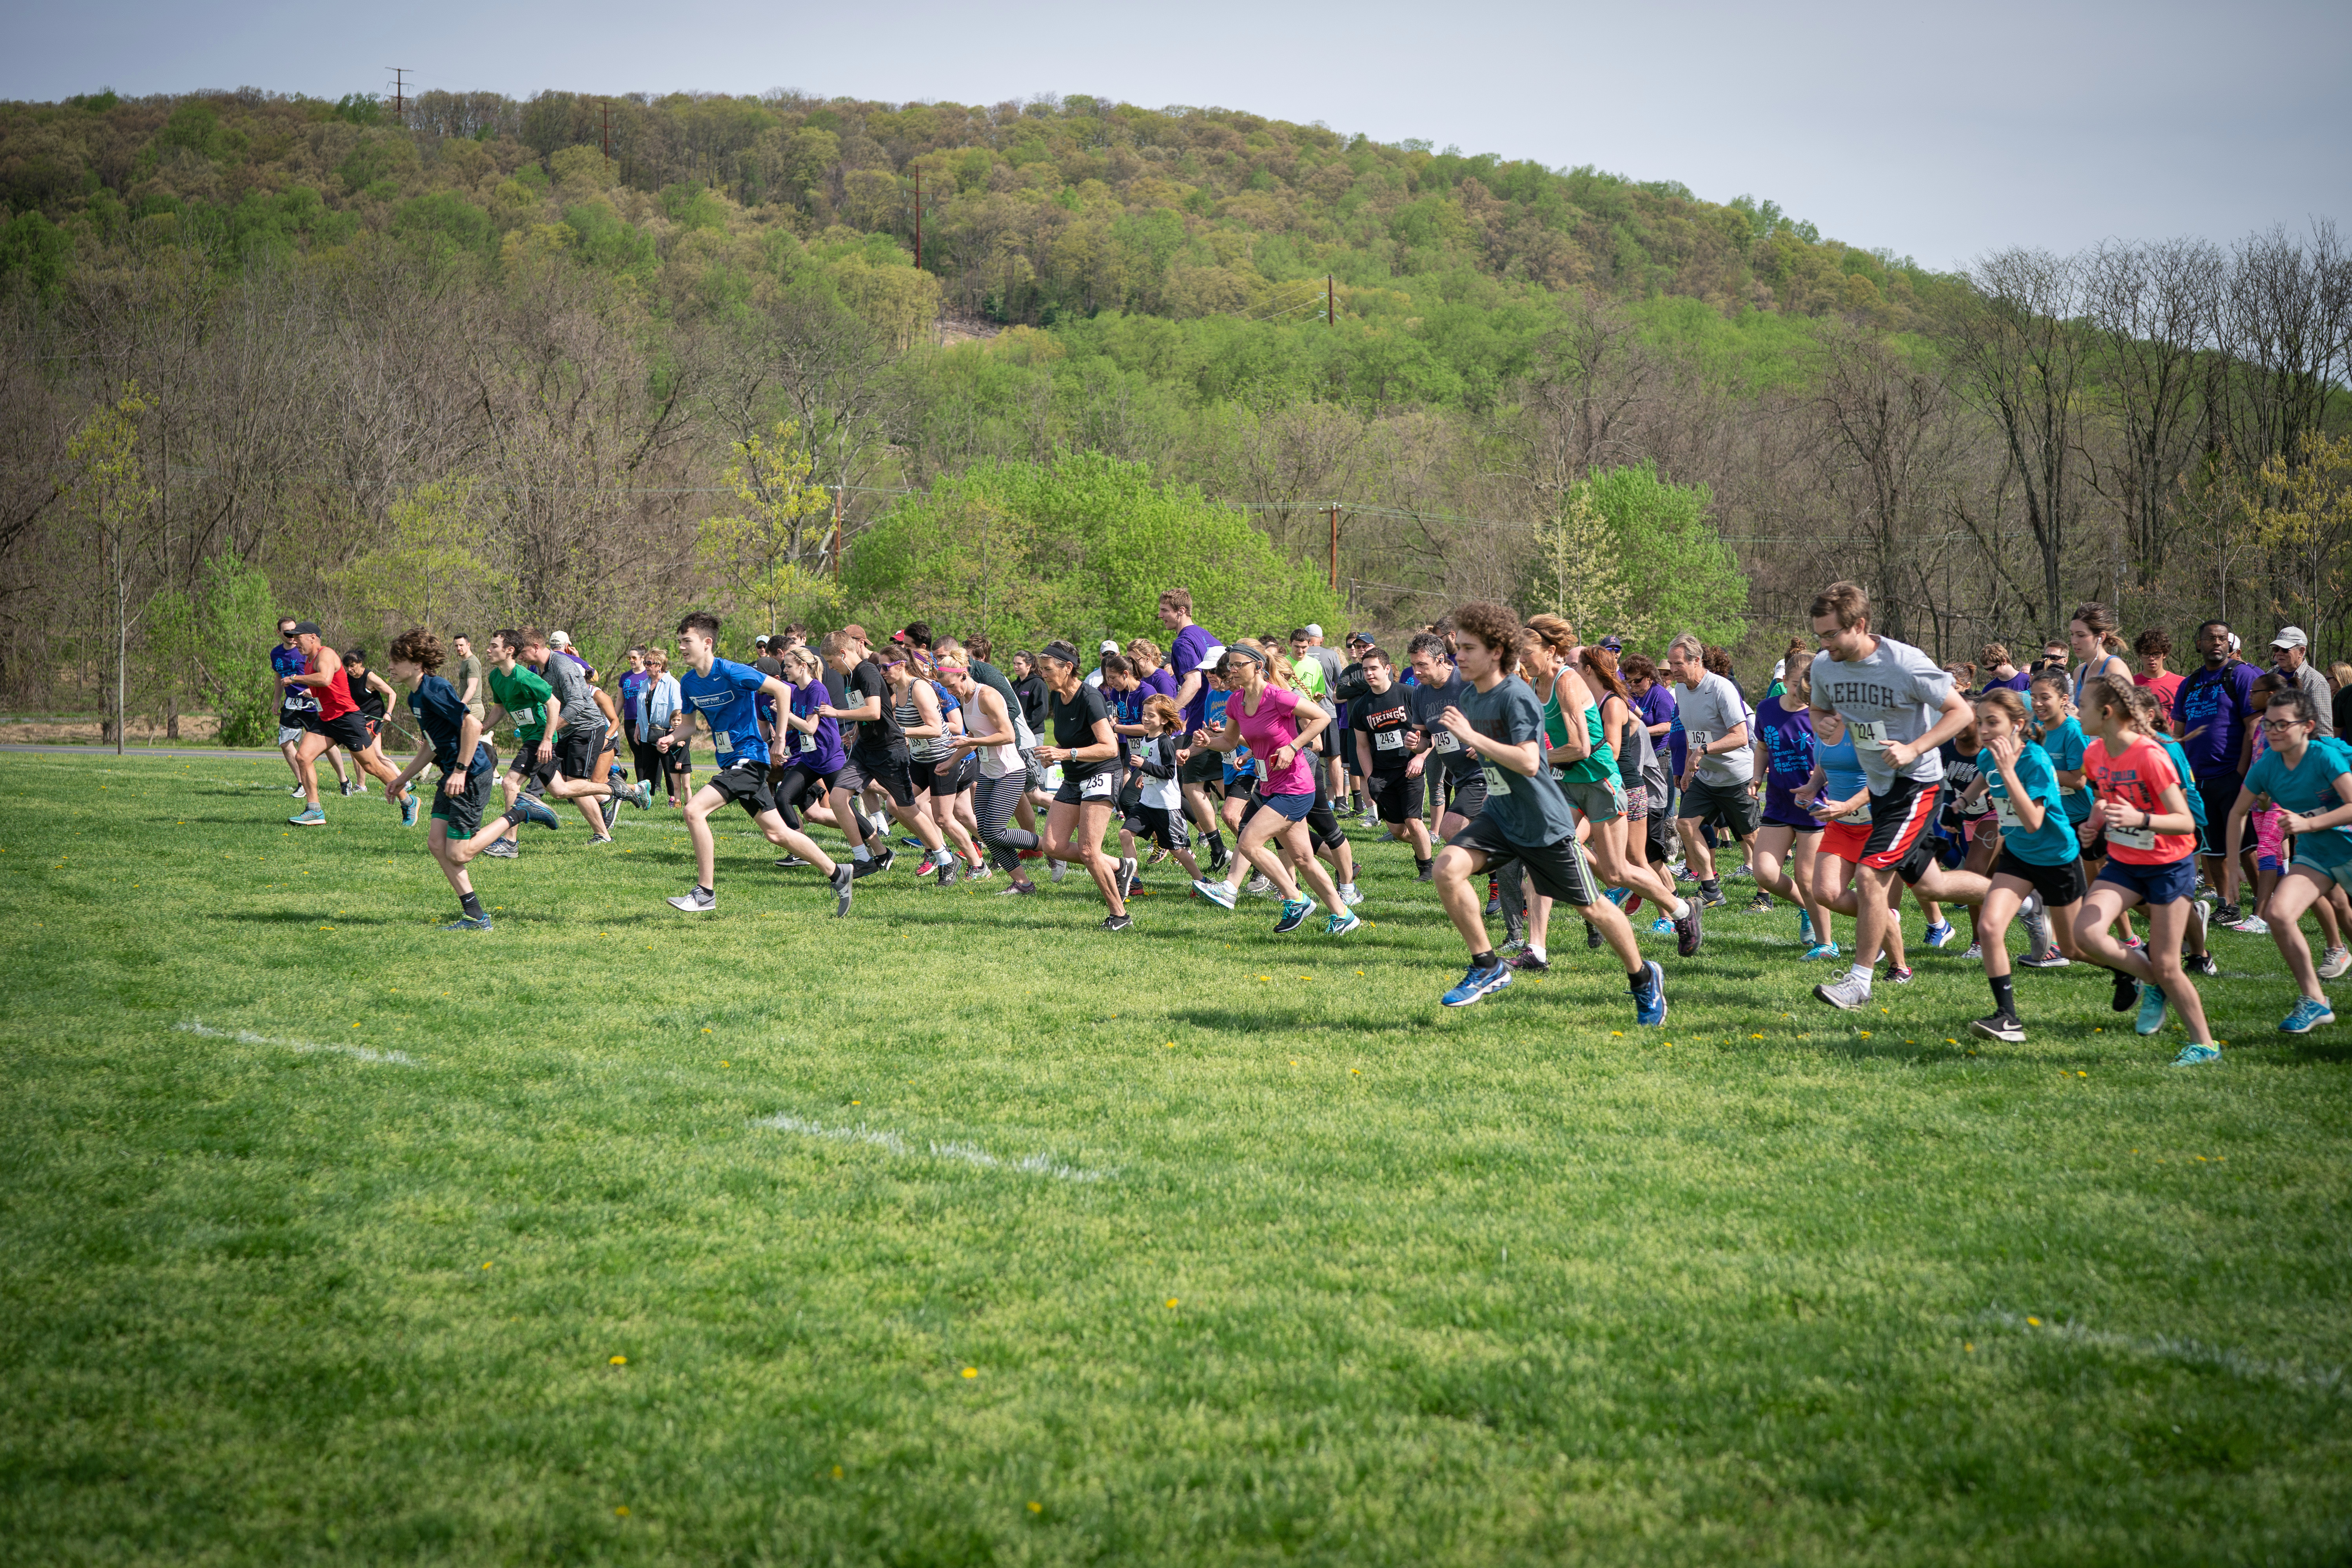 Group of runners starting a race